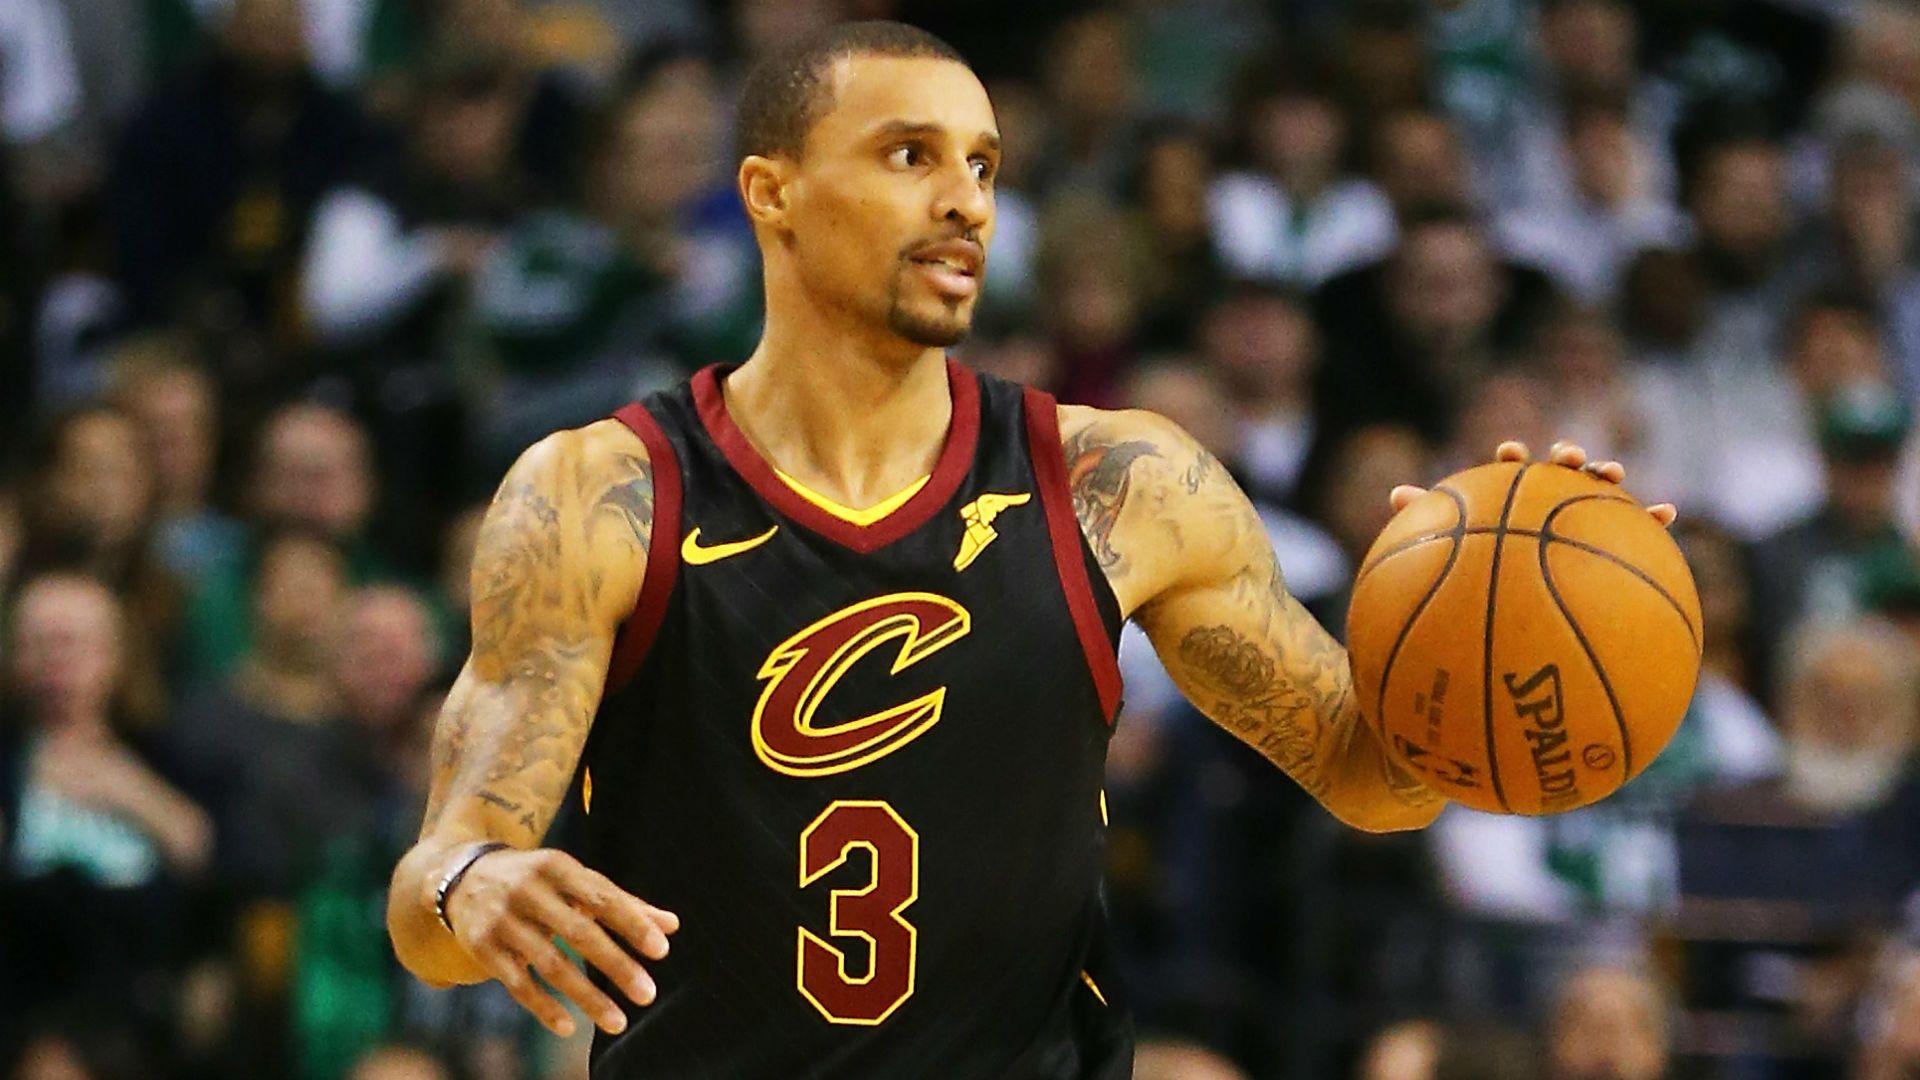 NBA playoffs 2018: Cavs' George Hill out for Game 4 with back spasms